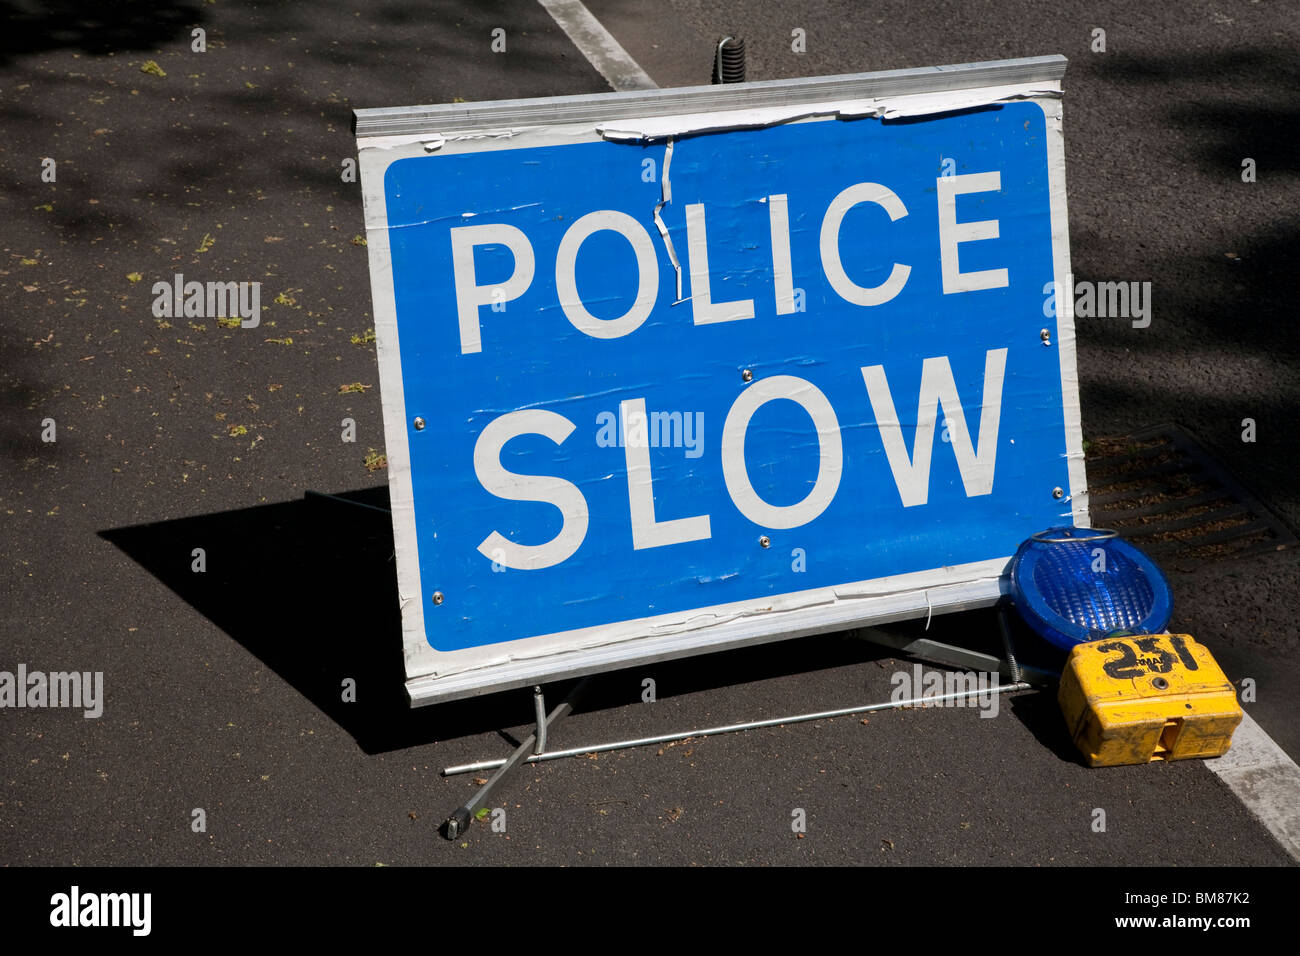 Police Slow sign with blue light Stock Photo